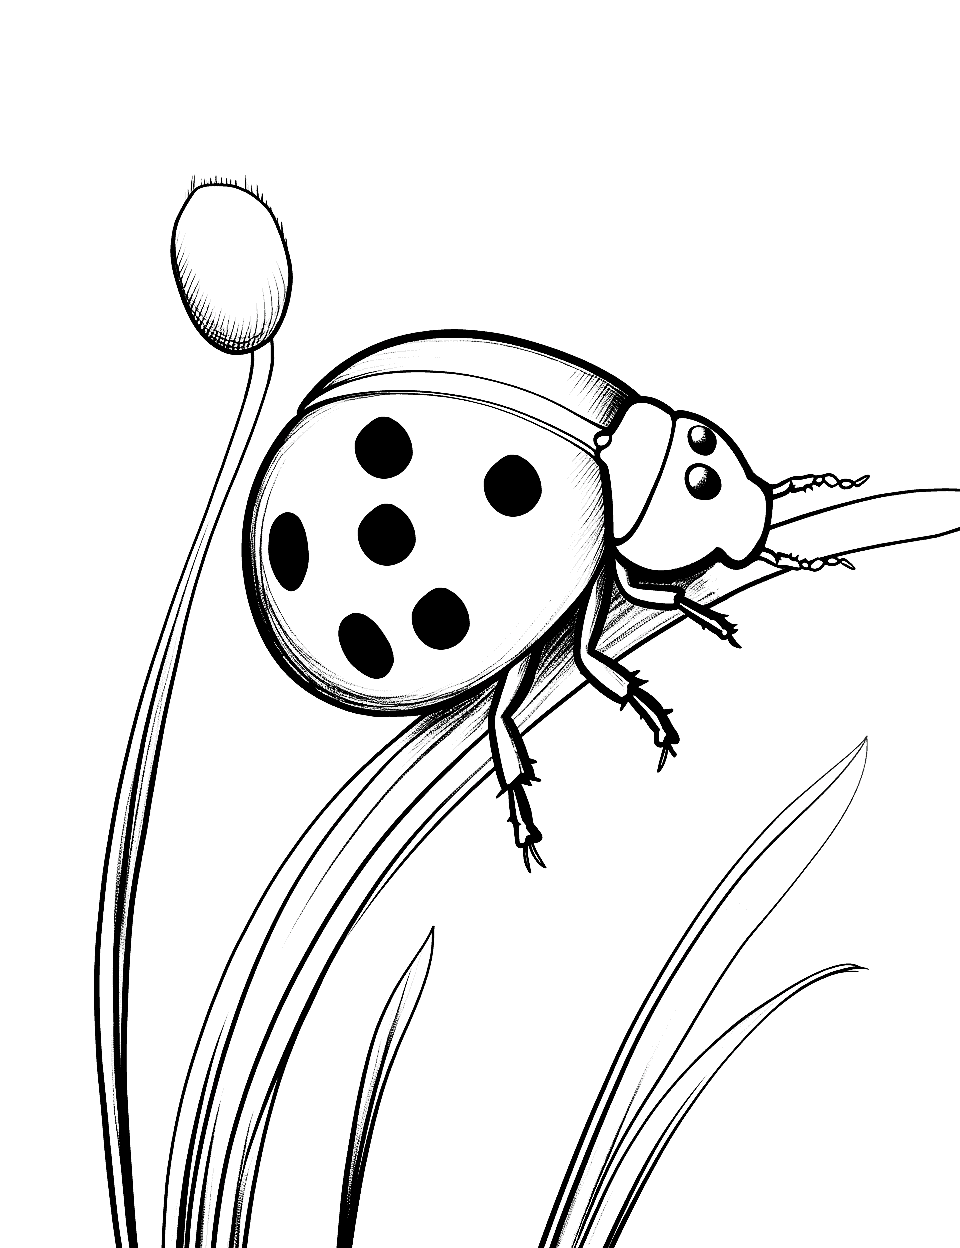 Serene Ladybug on a Quiet Day Coloring Page - A ladybug sitting quietly on a blade of grass, enjoying the calm.